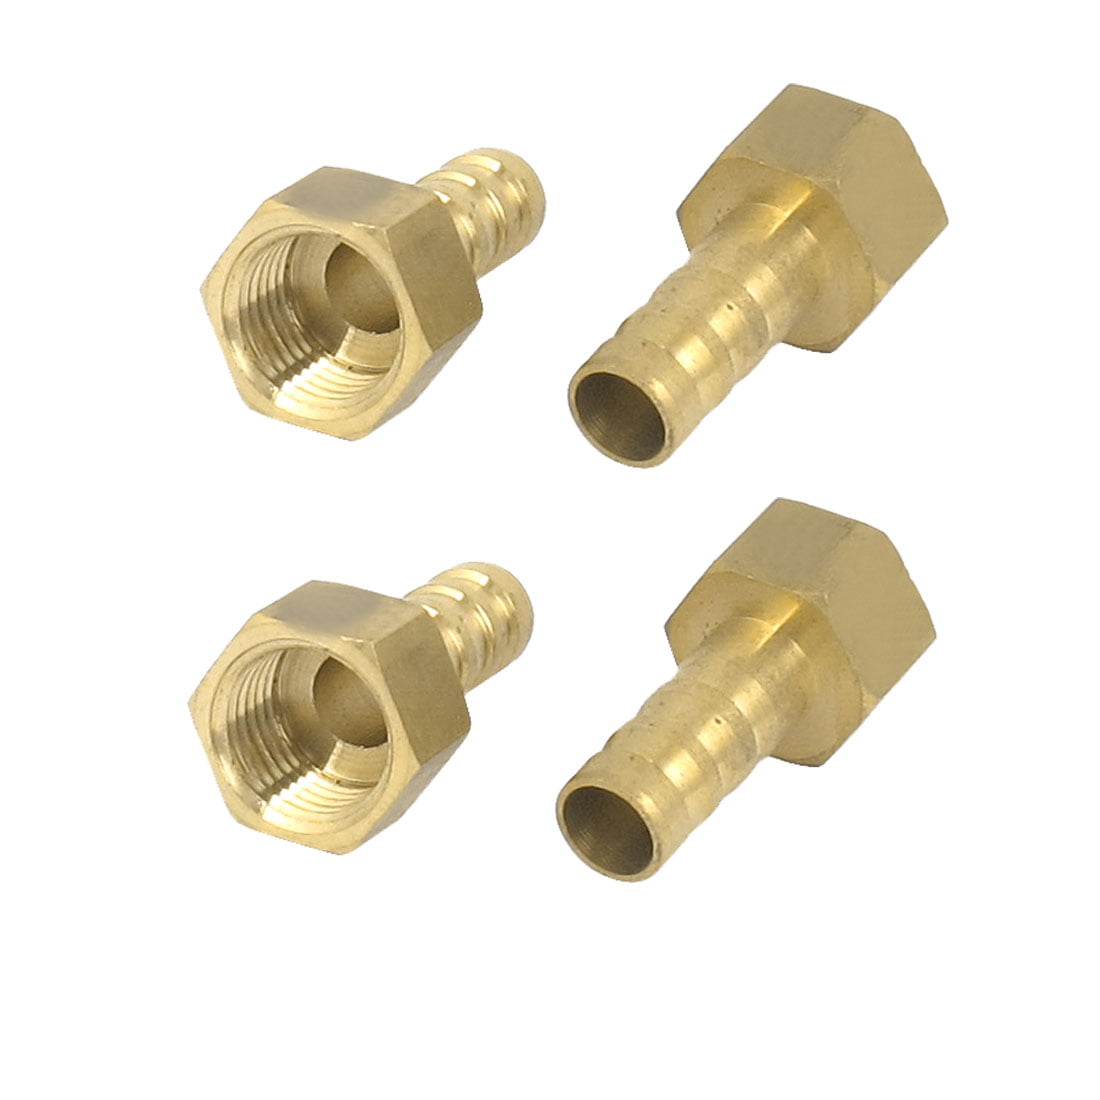 10 Pcs Brass 8mm Fuel Gas Hose Barb 1/4BSP Male Thread Coupling Fitting